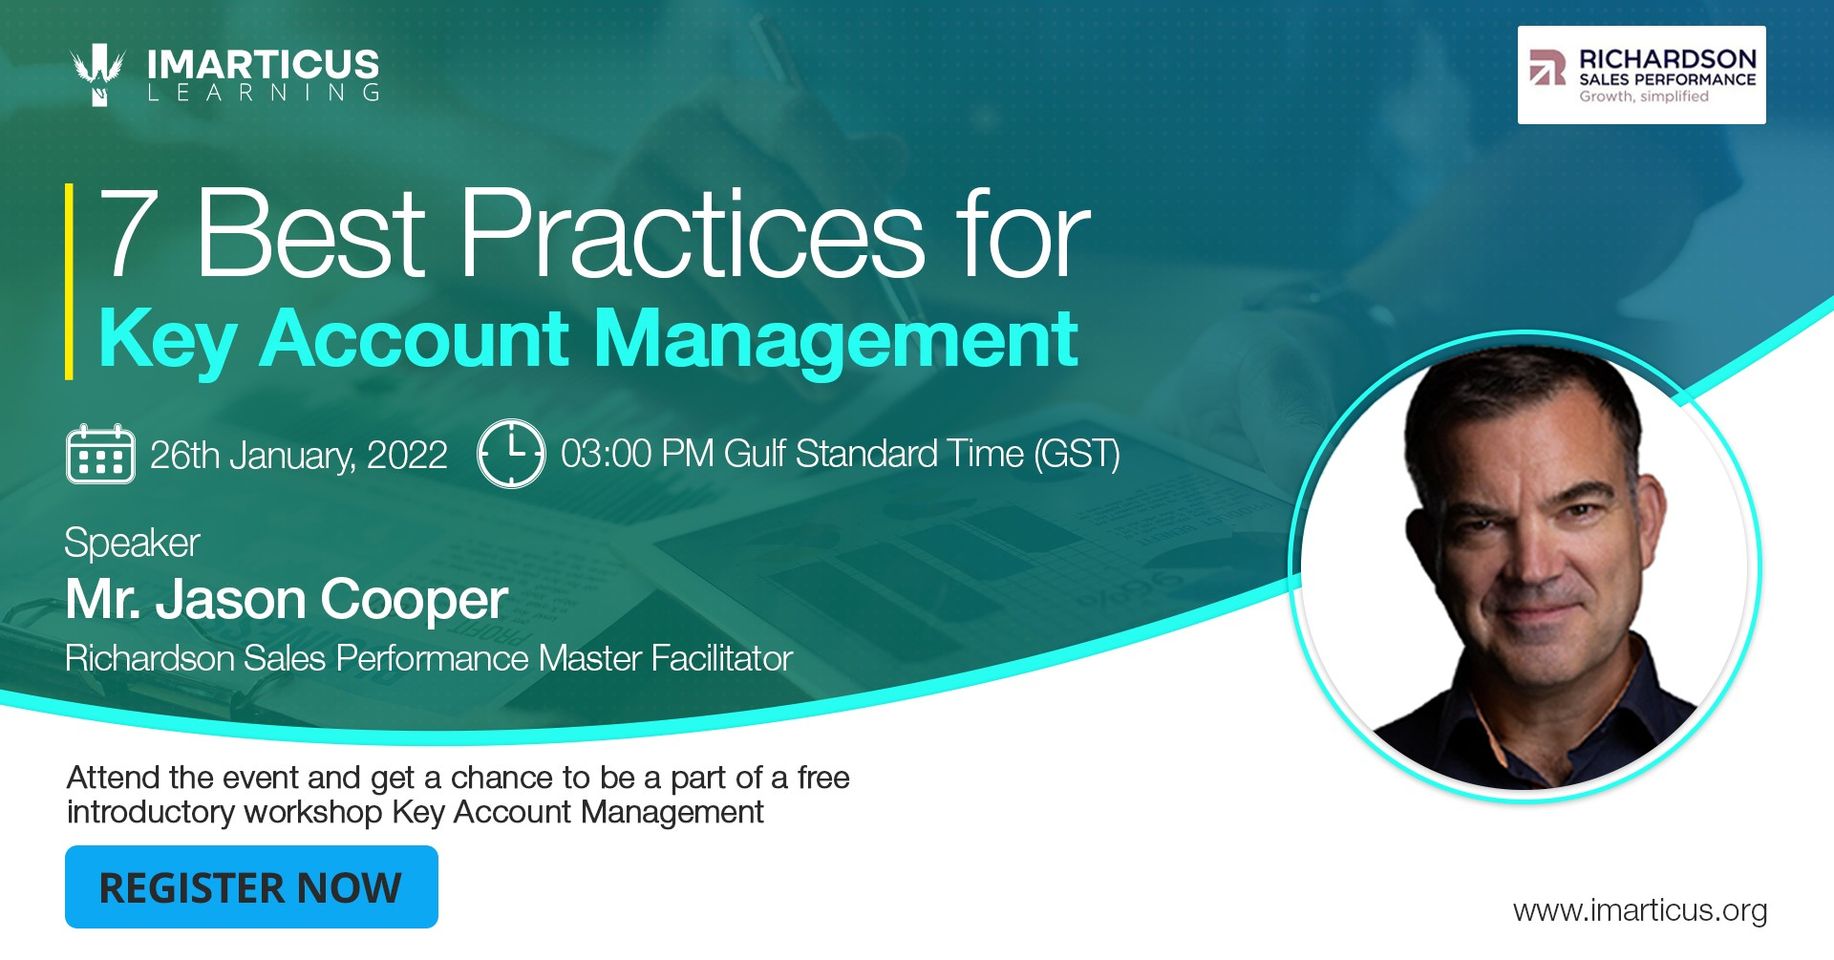 7 Best Practices for Key Account Management, Online Event